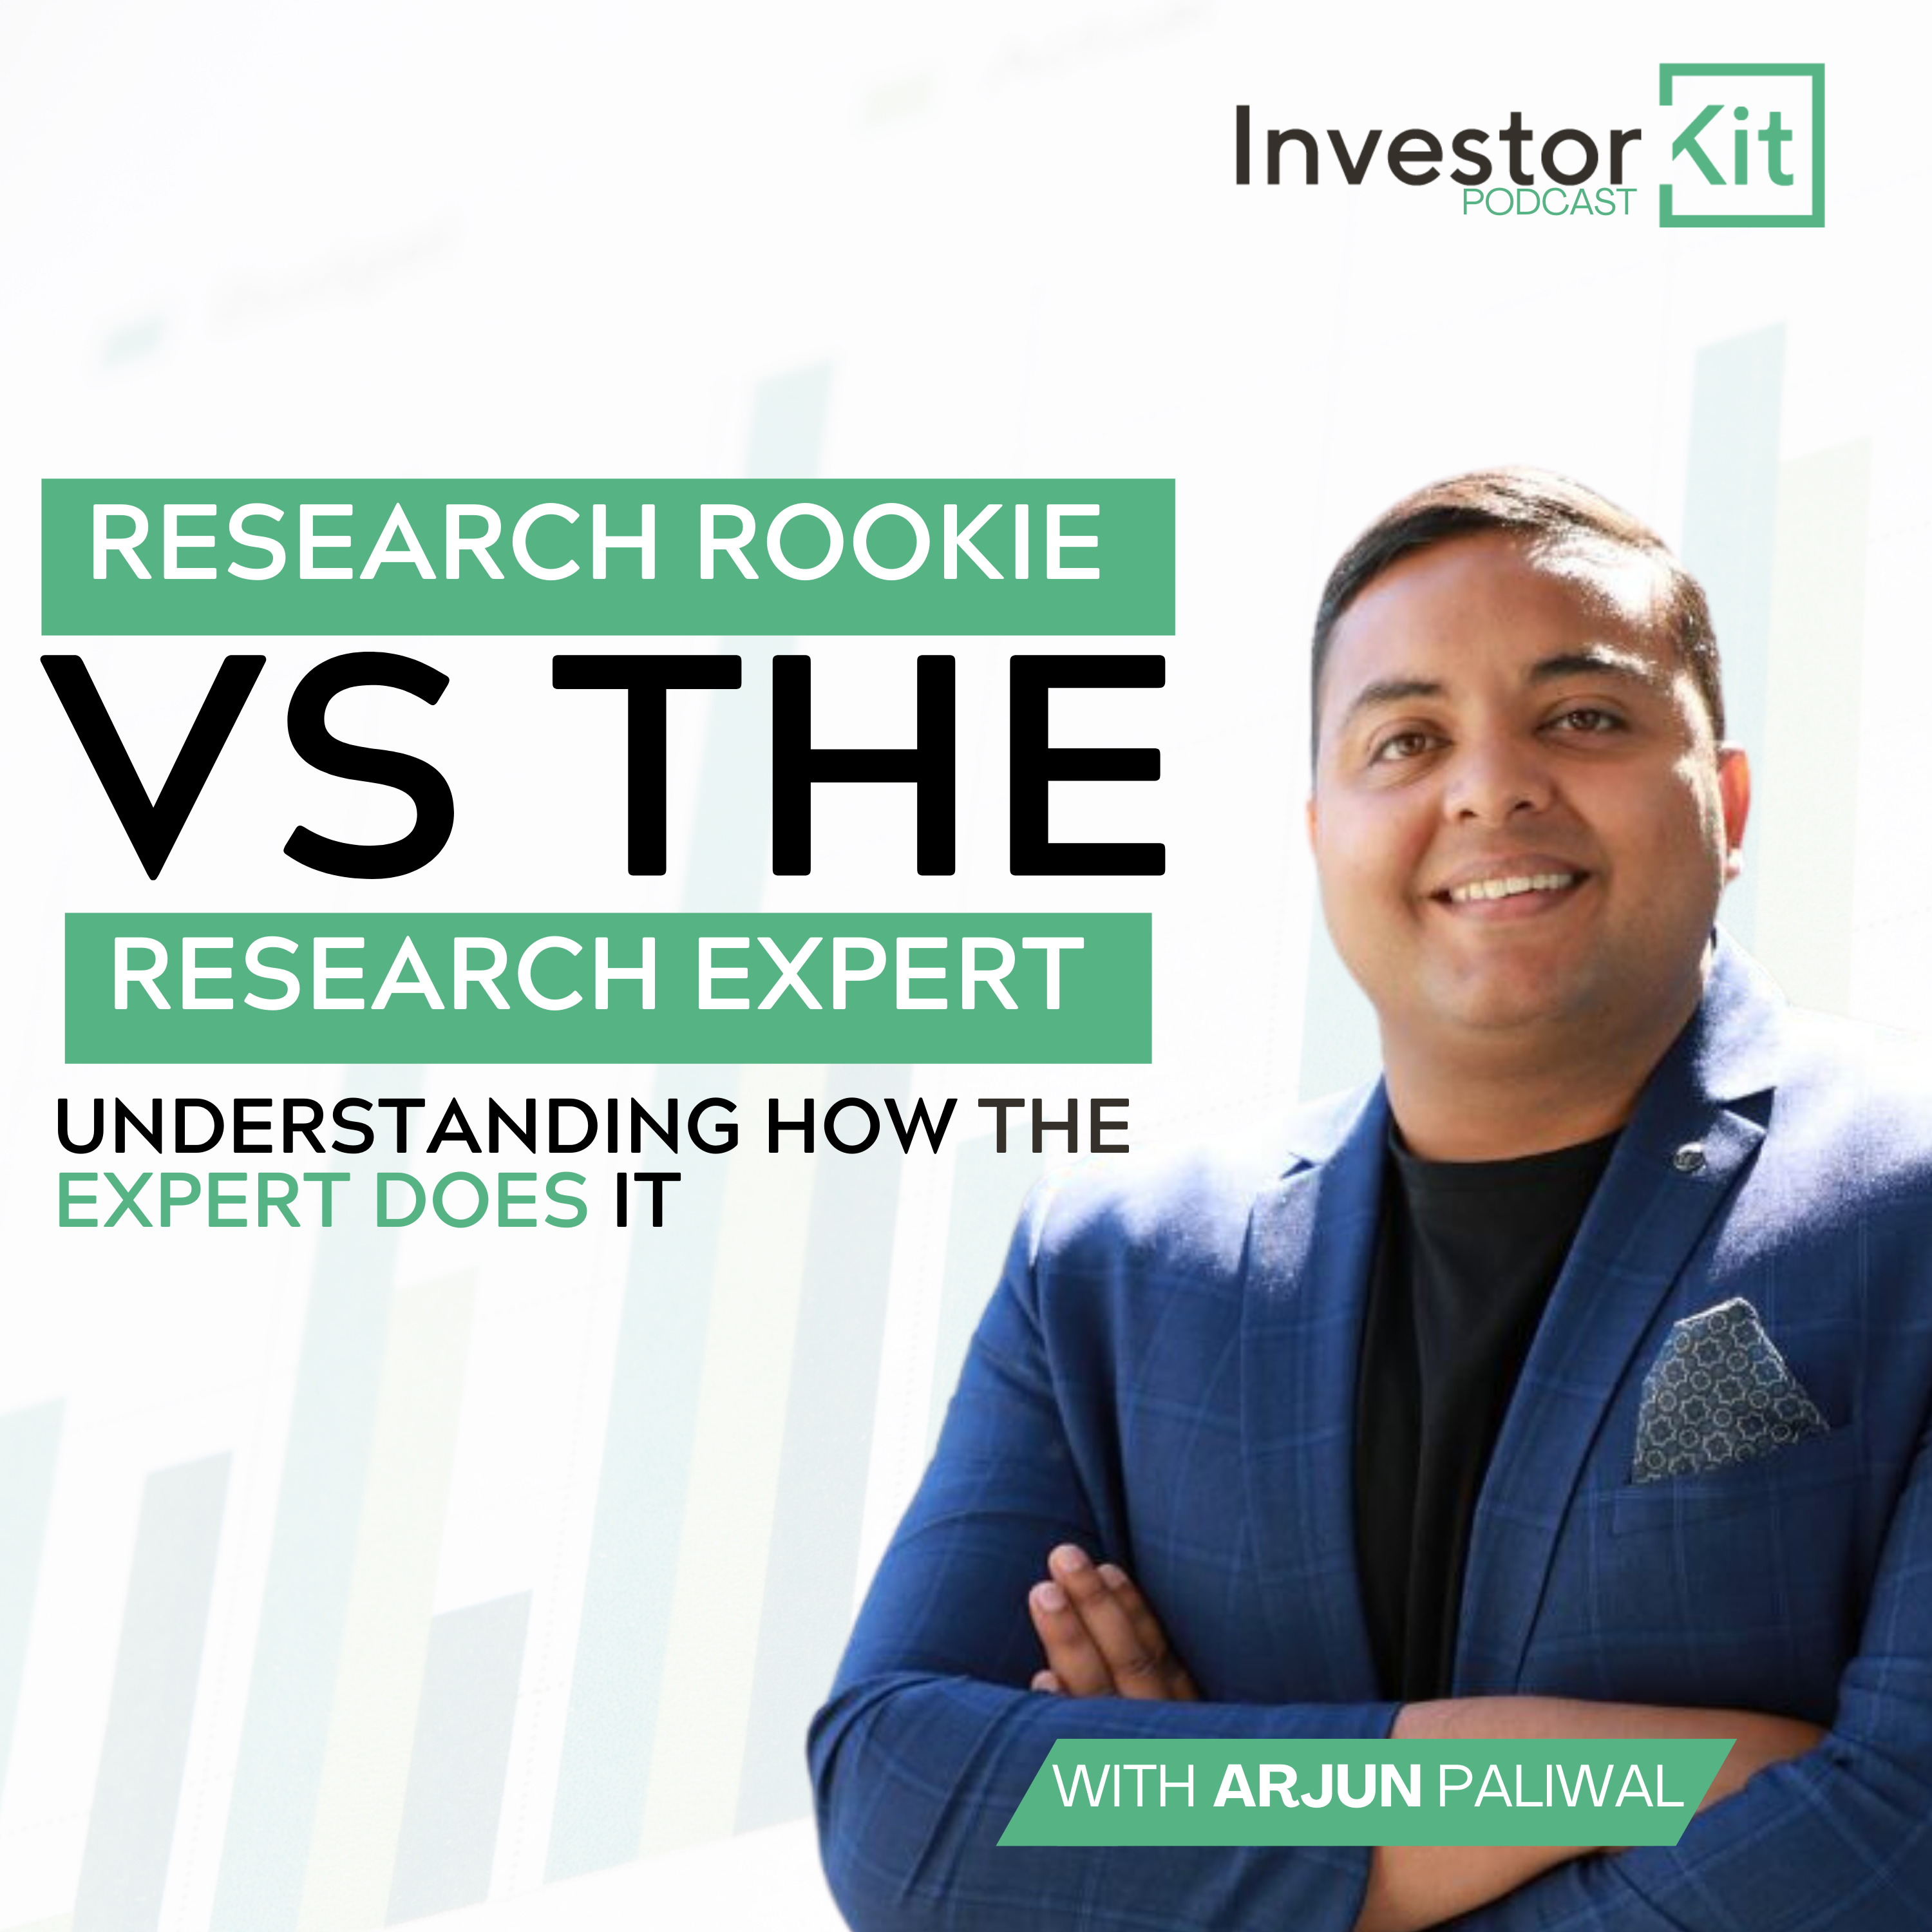 The Research Rookie vs The Research Expert